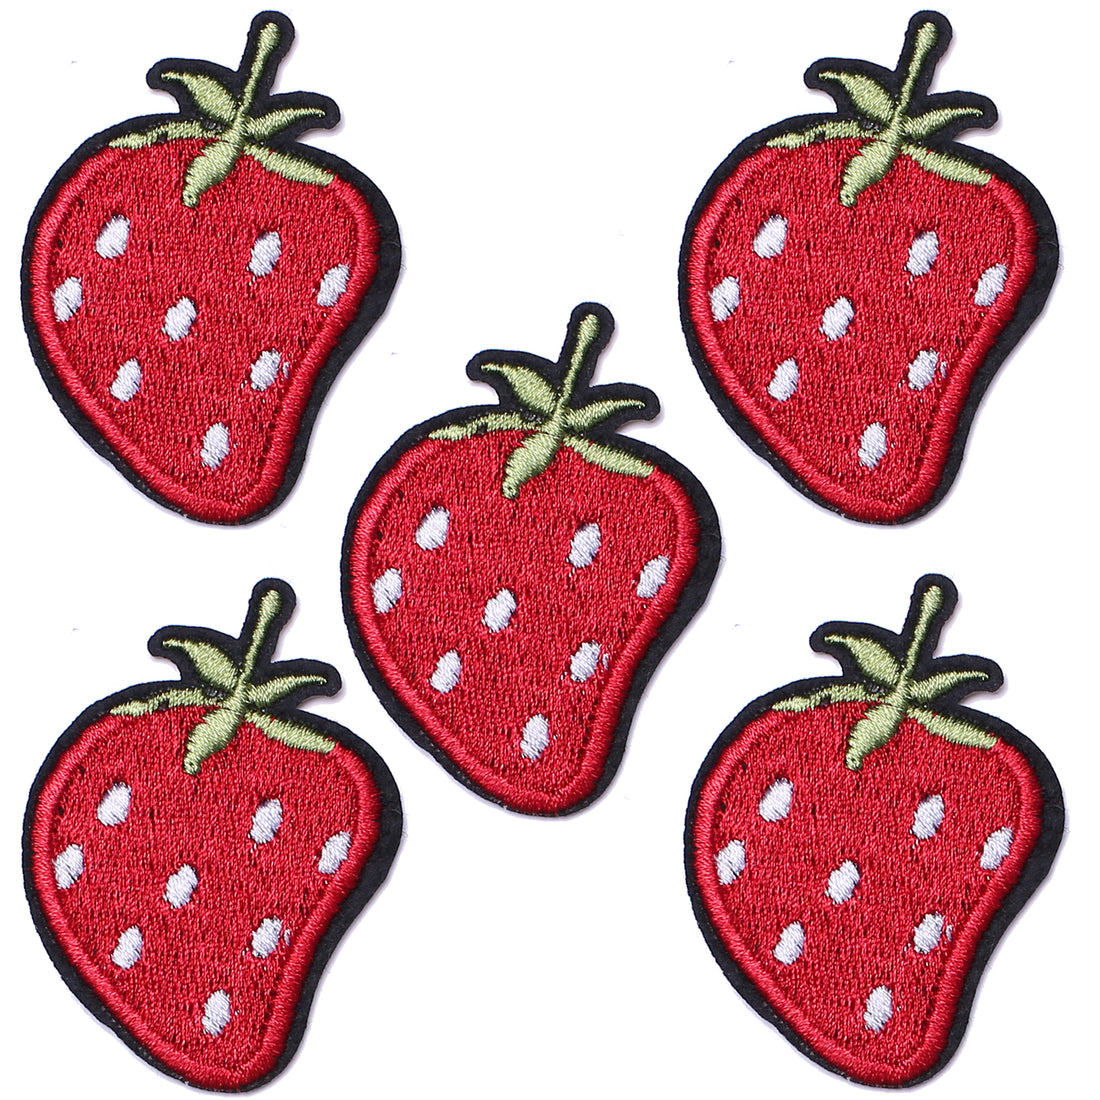 5Pcs Cute Strawberry Embroidered Iron on Patch for Clothes, Iron-on Patches / Sew-on Appliques Patches for Clothing, Jackets, Backpacks, Caps, Jeans